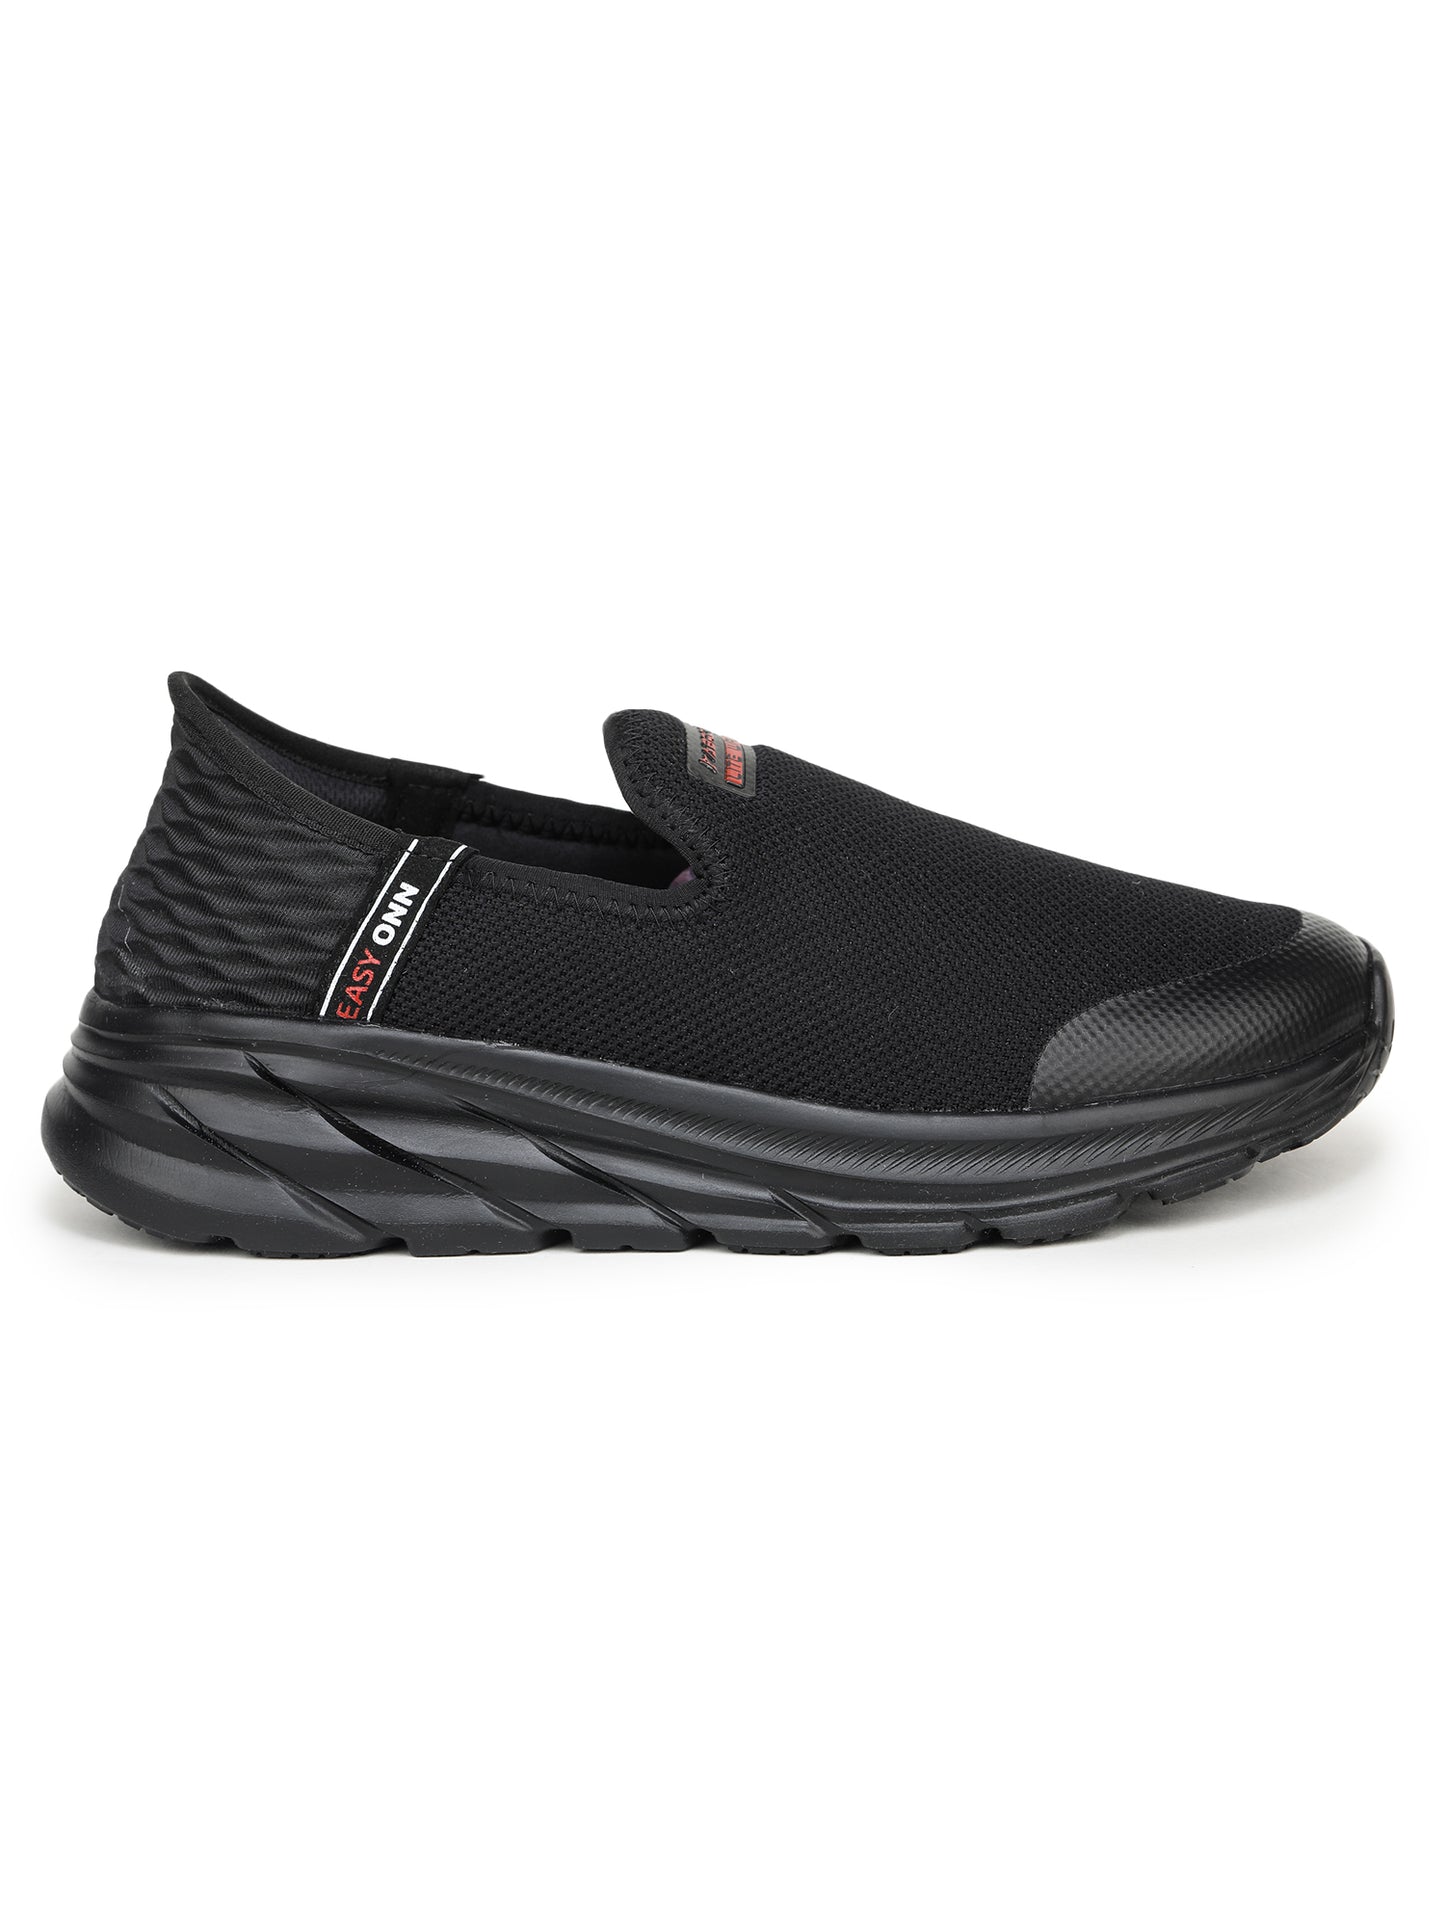 ABROS Easy-On Sports Shoes For Men